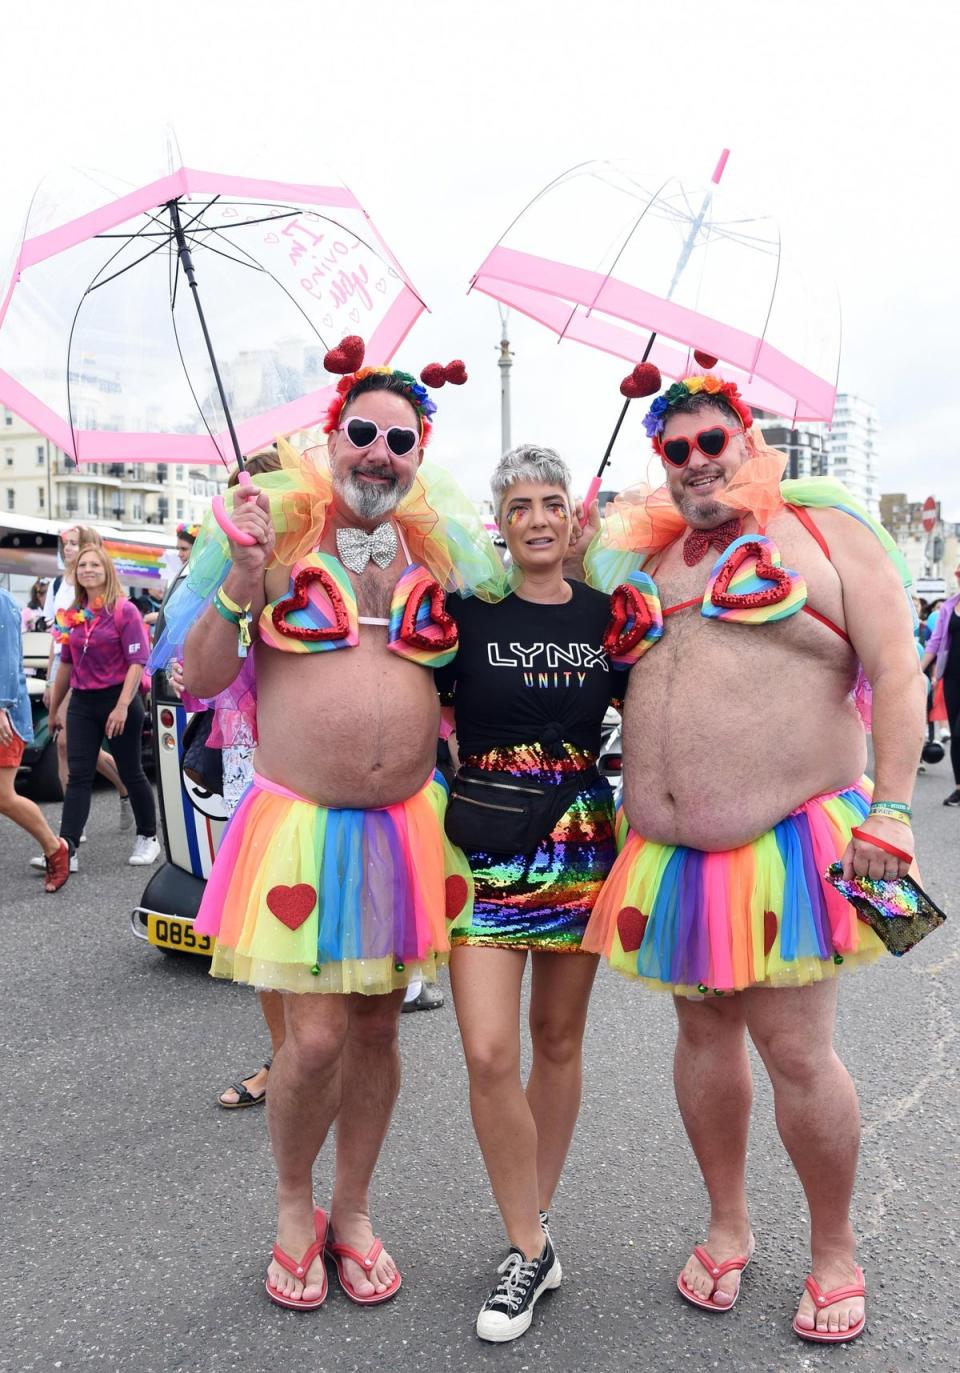 Thousands took to the streets for the Brighton pride festival. (Justin Goff/goffphotos.com)